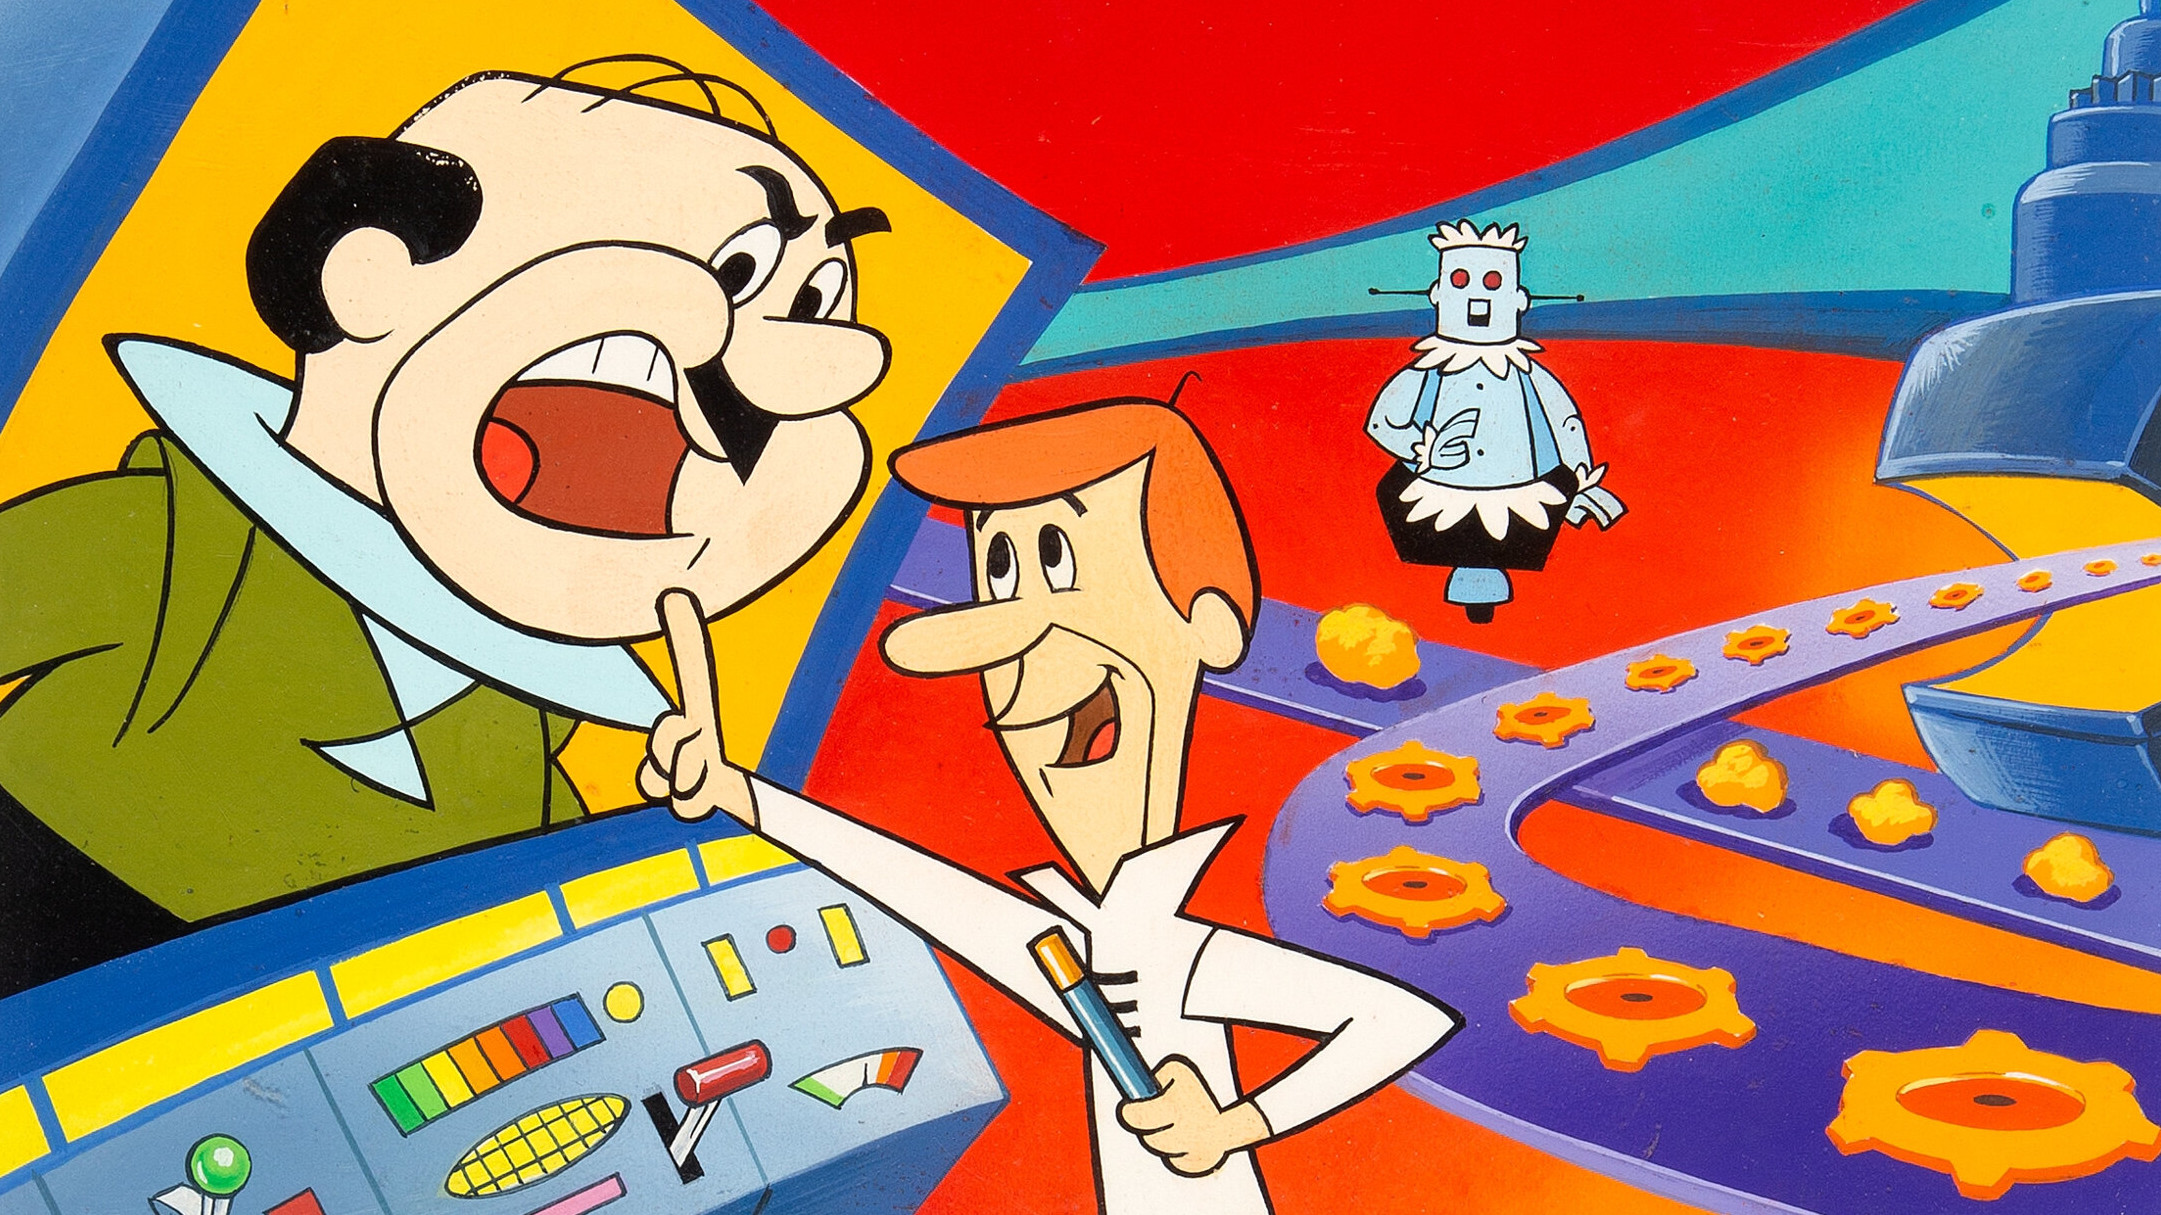 The Jetsons in By George, in Trouble Again